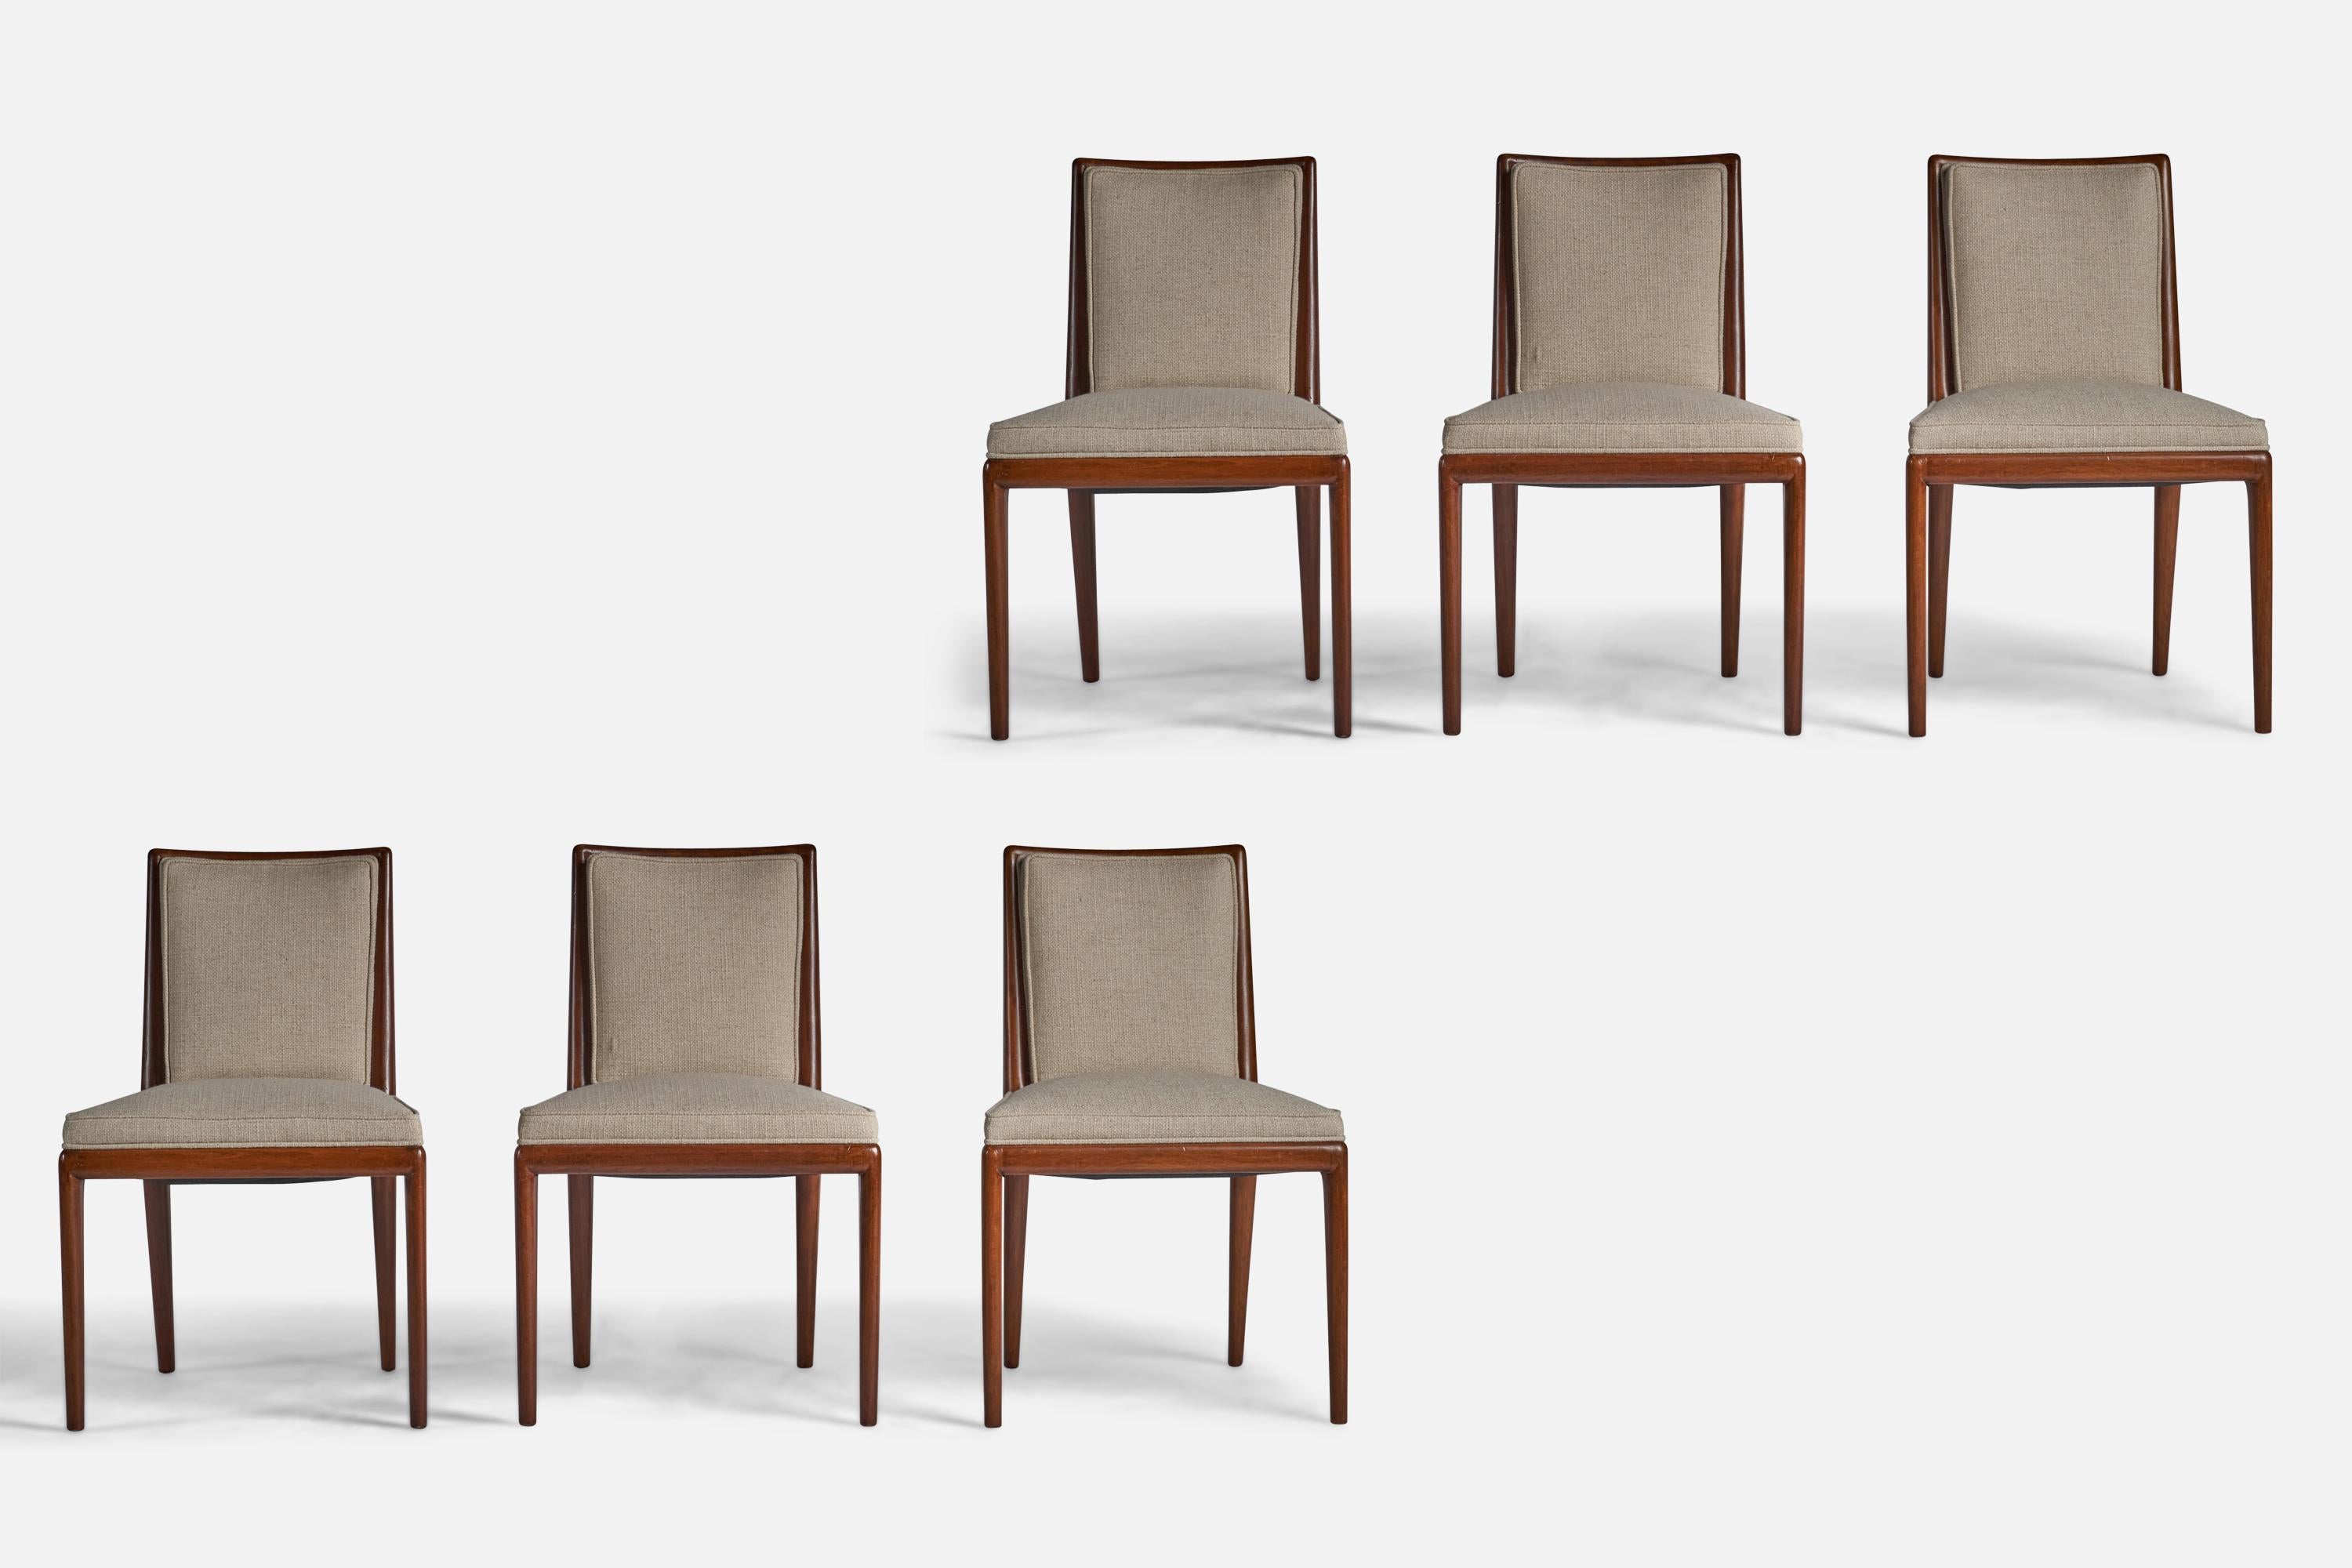 A set of 6 walnut and off-white fabric dining or side chairs designed by T.H. Robsjohn-Gibbings and produced by Widdicomb, Grand Rapids, Michigan, 1950s. 
18.5